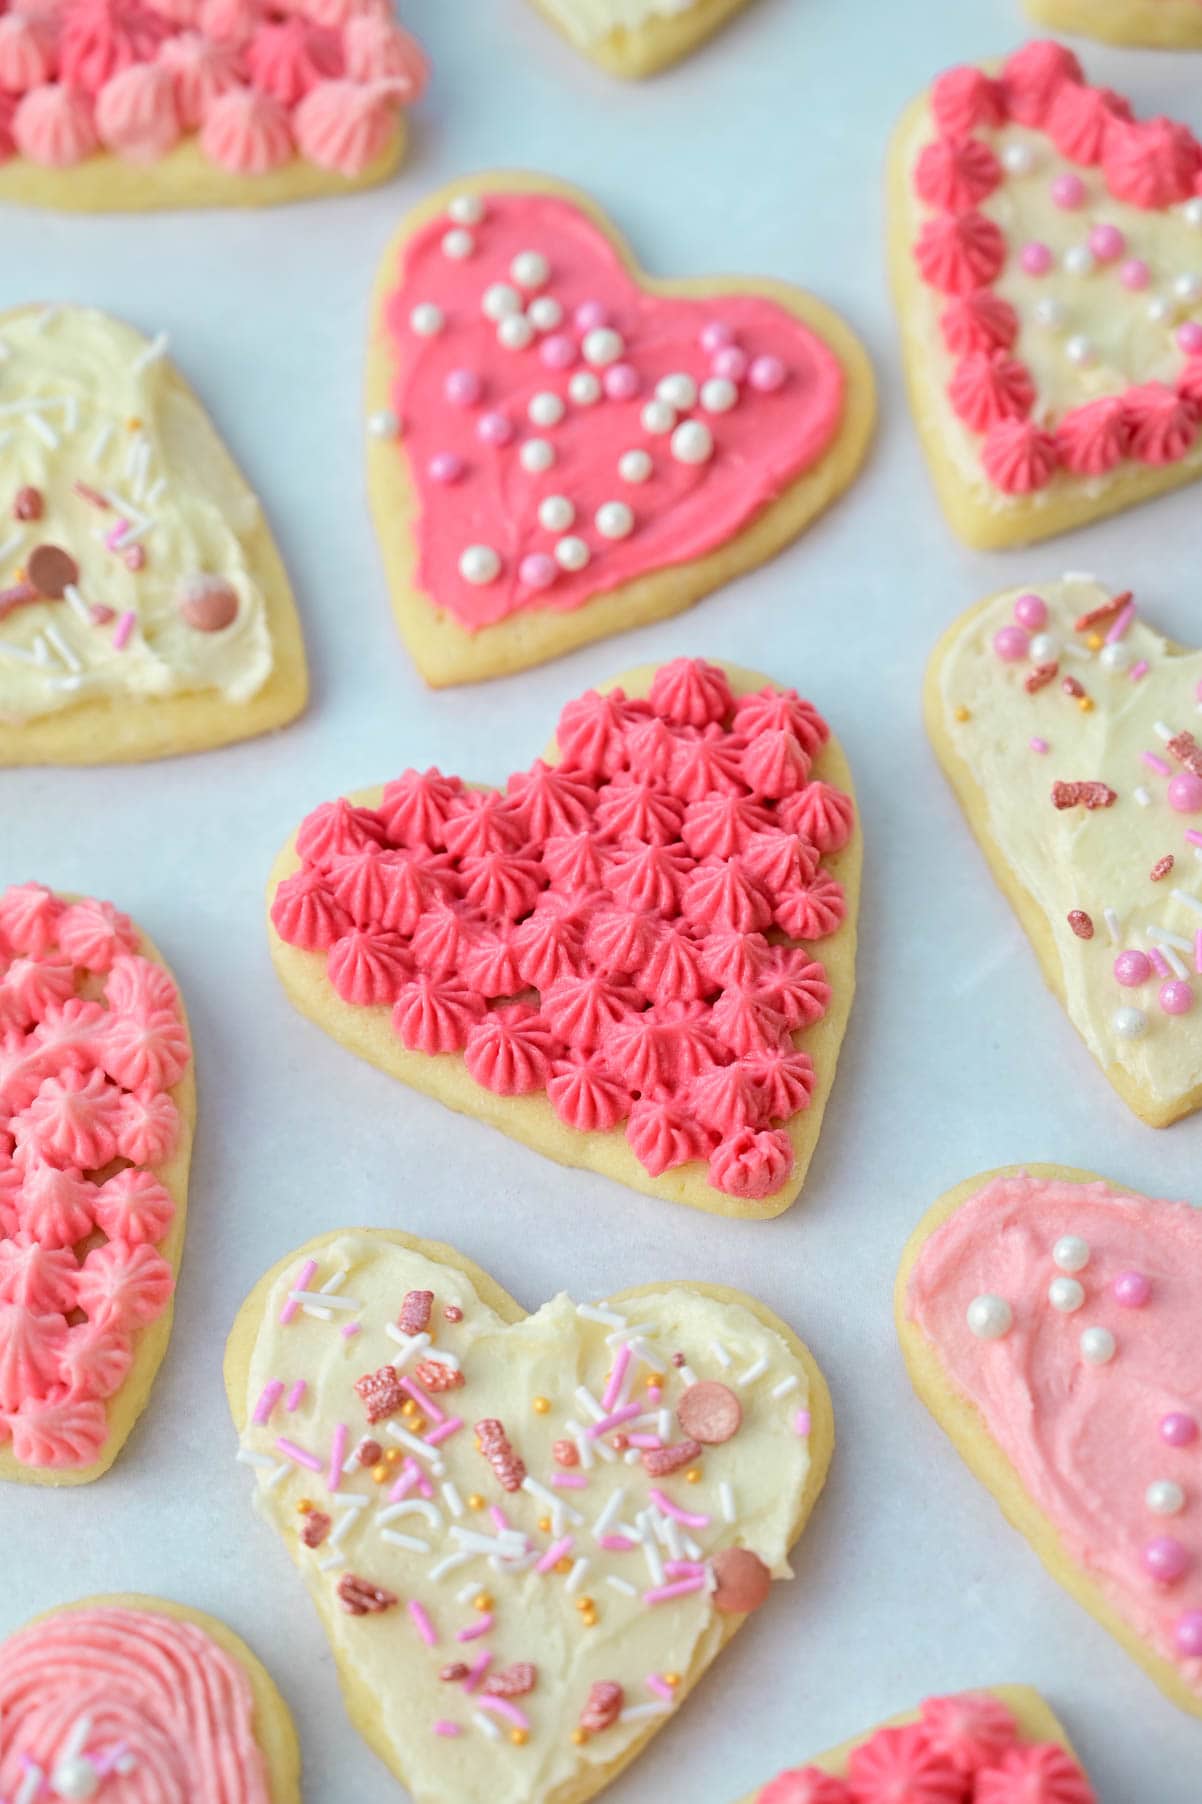 Heart-shaped Valentine's day cookied with pink frosting.